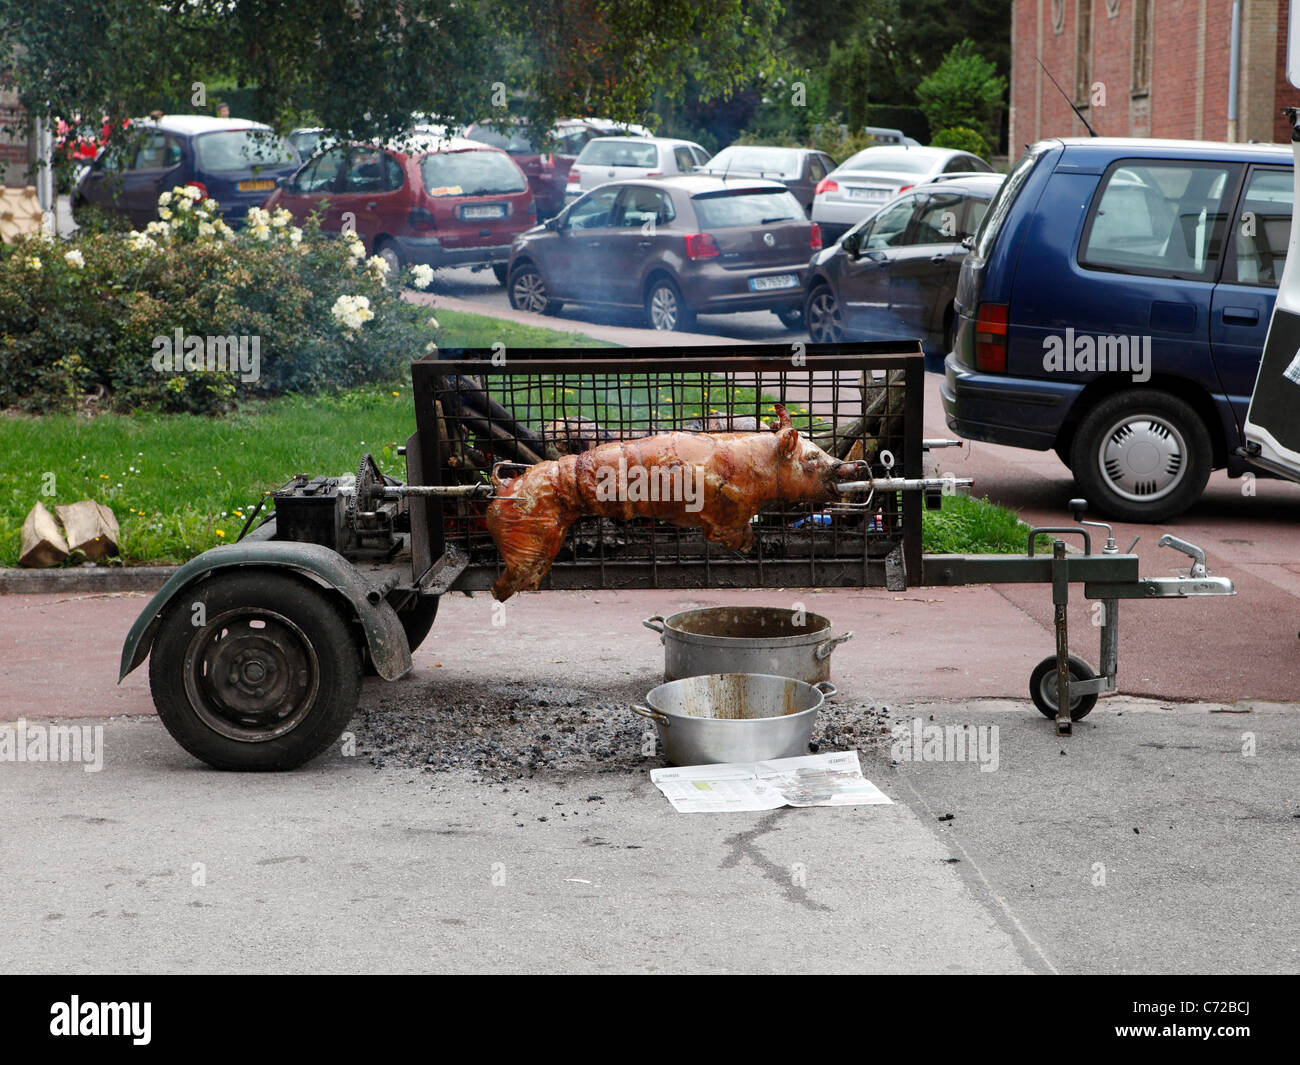 Spit roast in the street Pigs roasting on an open spindle barbeque Stock Photo